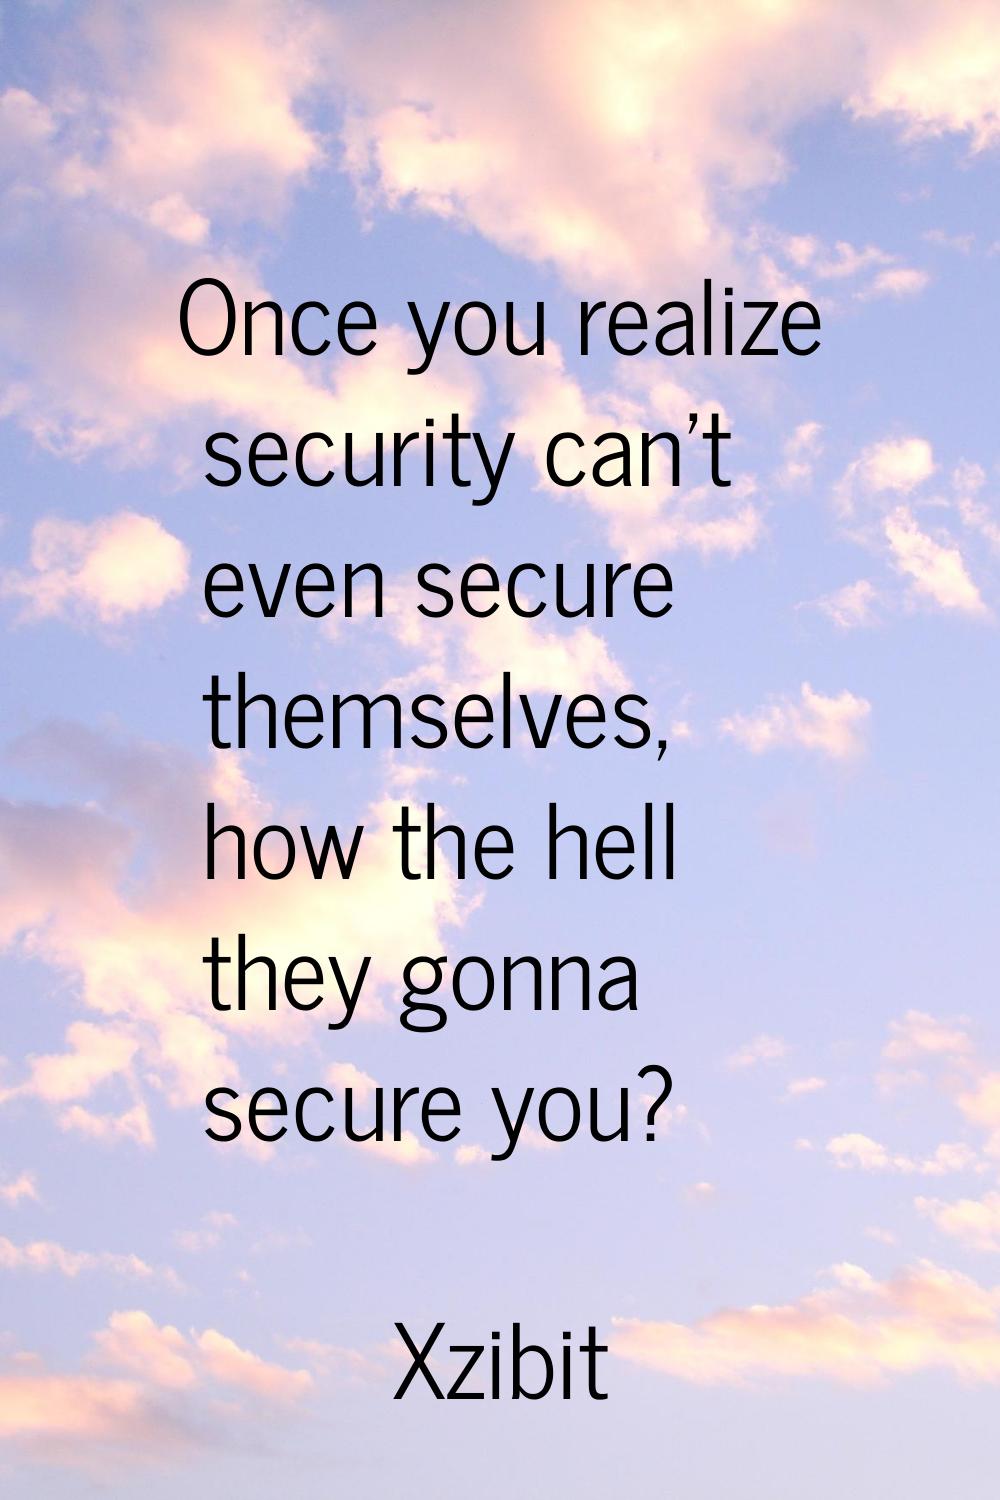 Once you realize security can't even secure themselves, how the hell they gonna secure you?